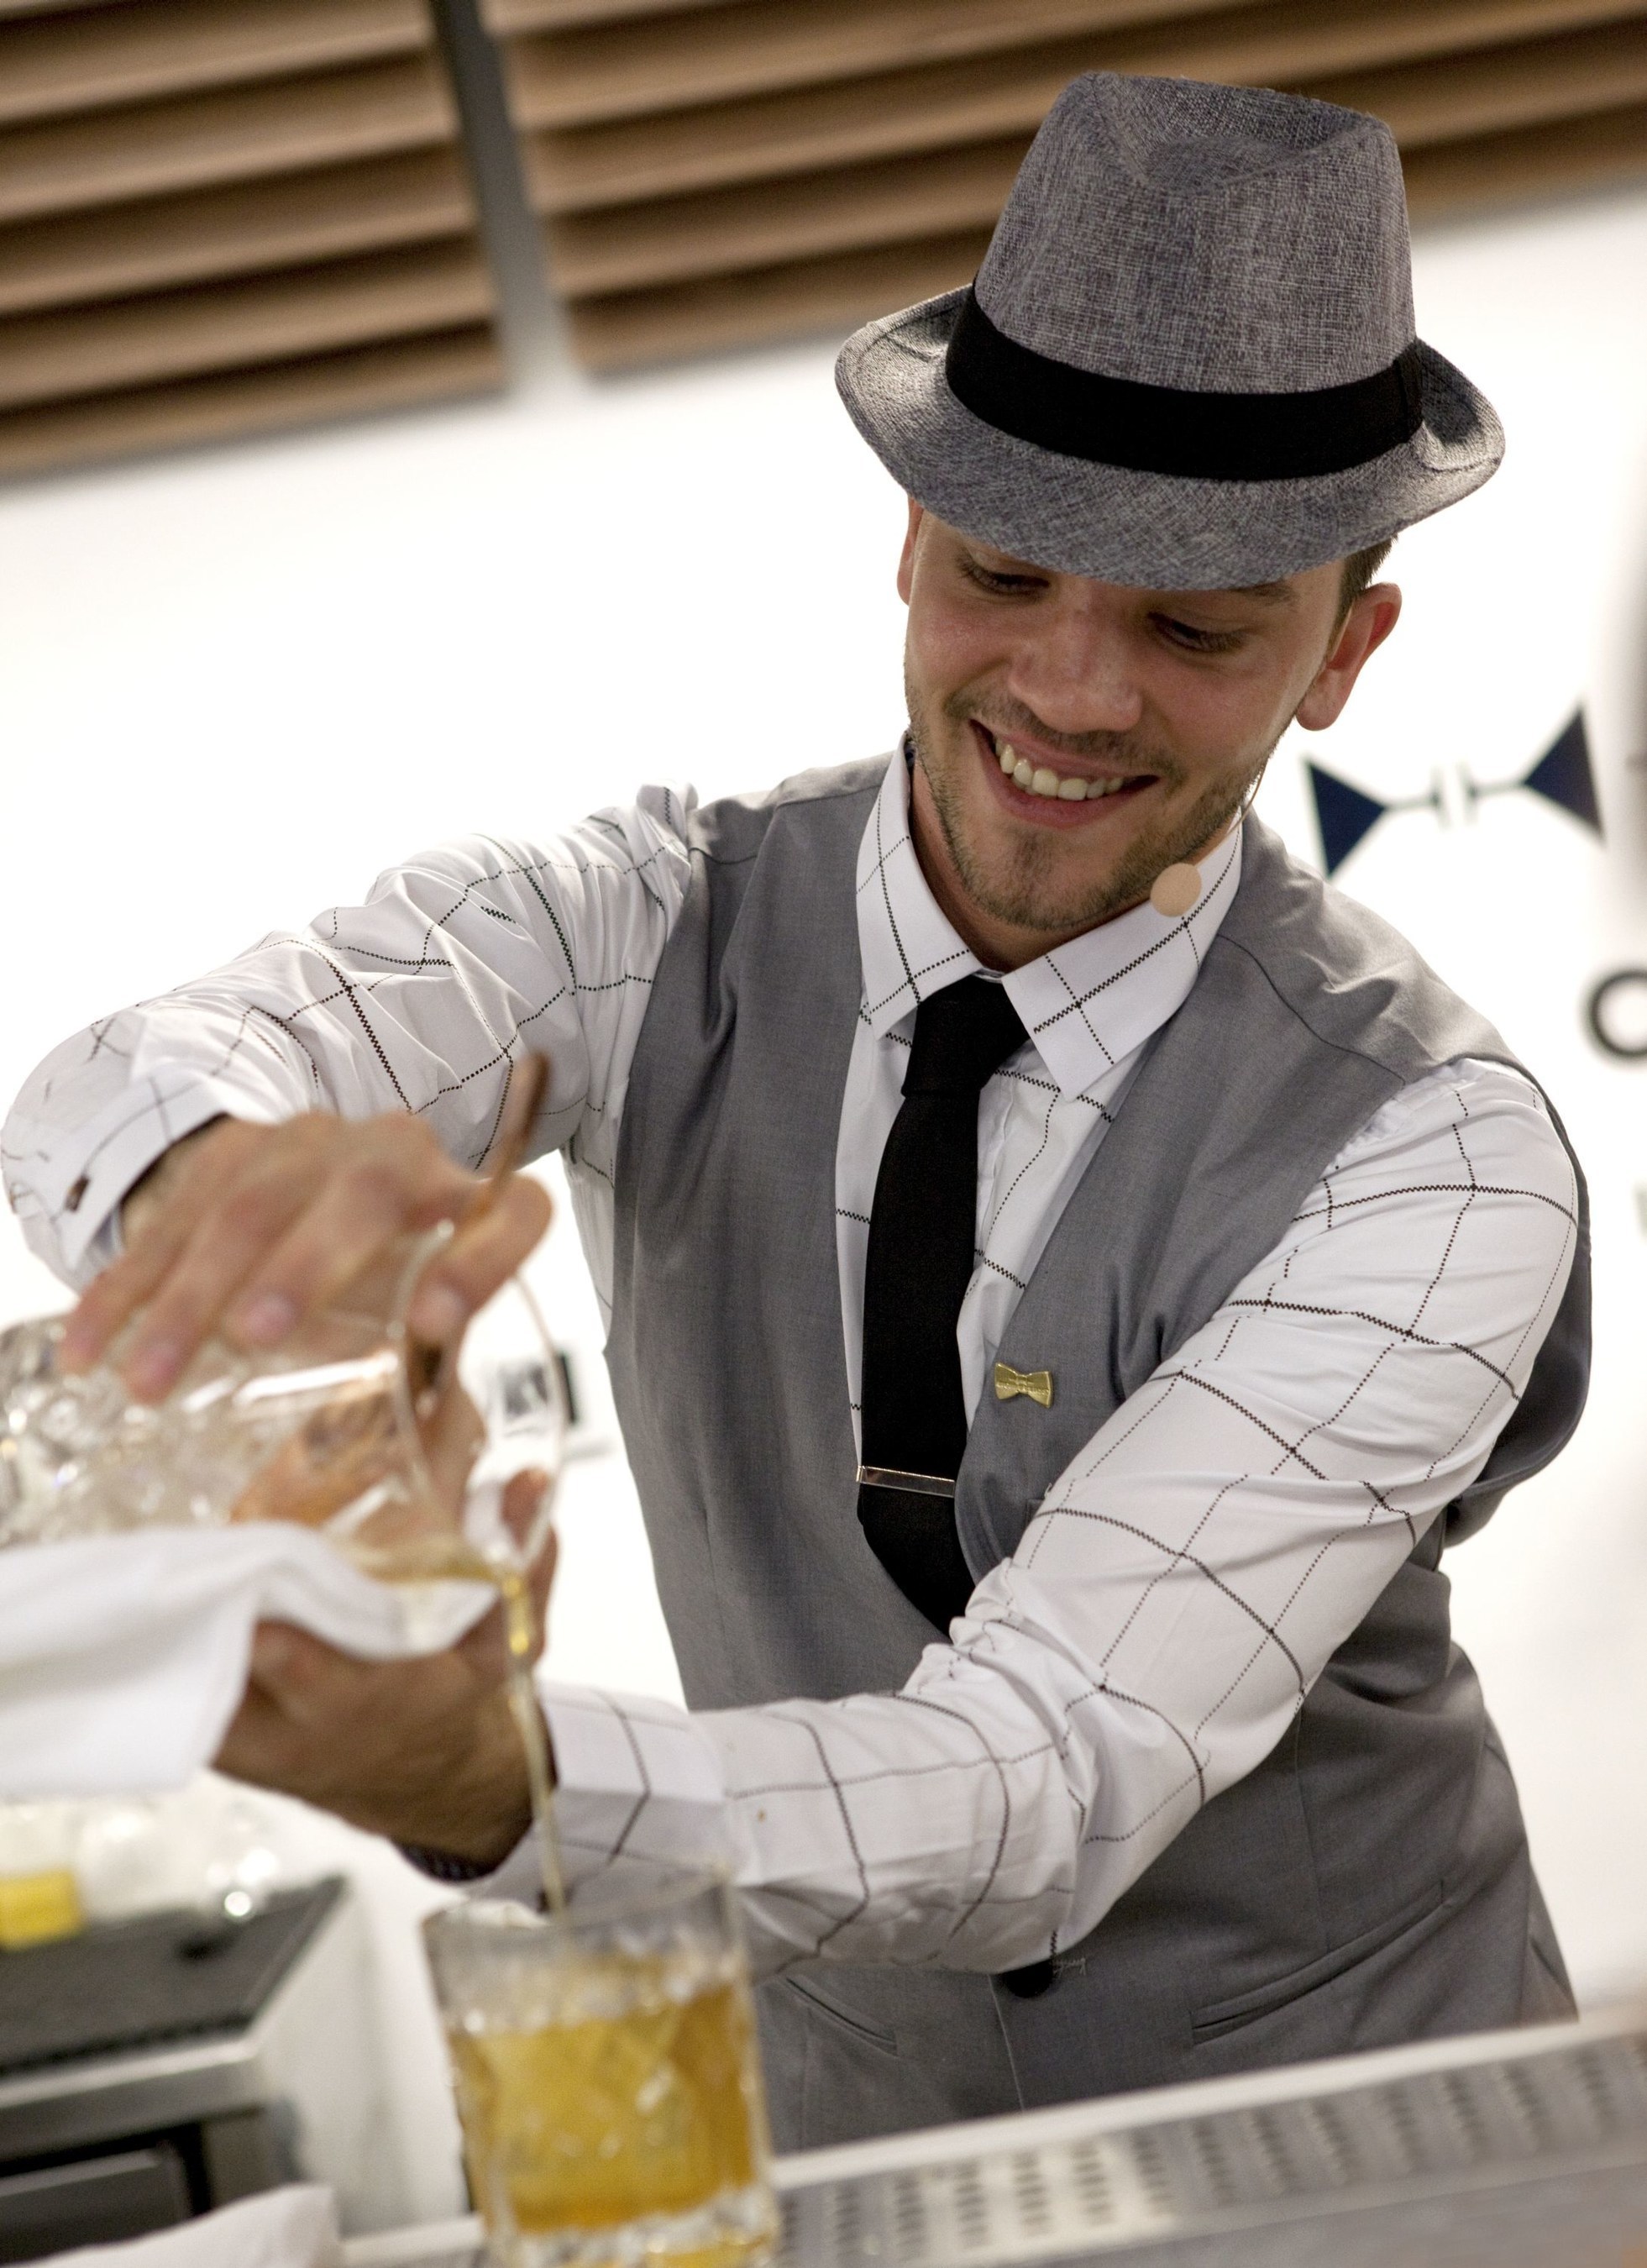 Andrej Malic, 27 of Celebrity Cruises creating the Old Timer cocktail featuring Bulleit Bourbon during the Diageo Global Travel World Class Final (PRNewsFoto/Diageo Global Travel)